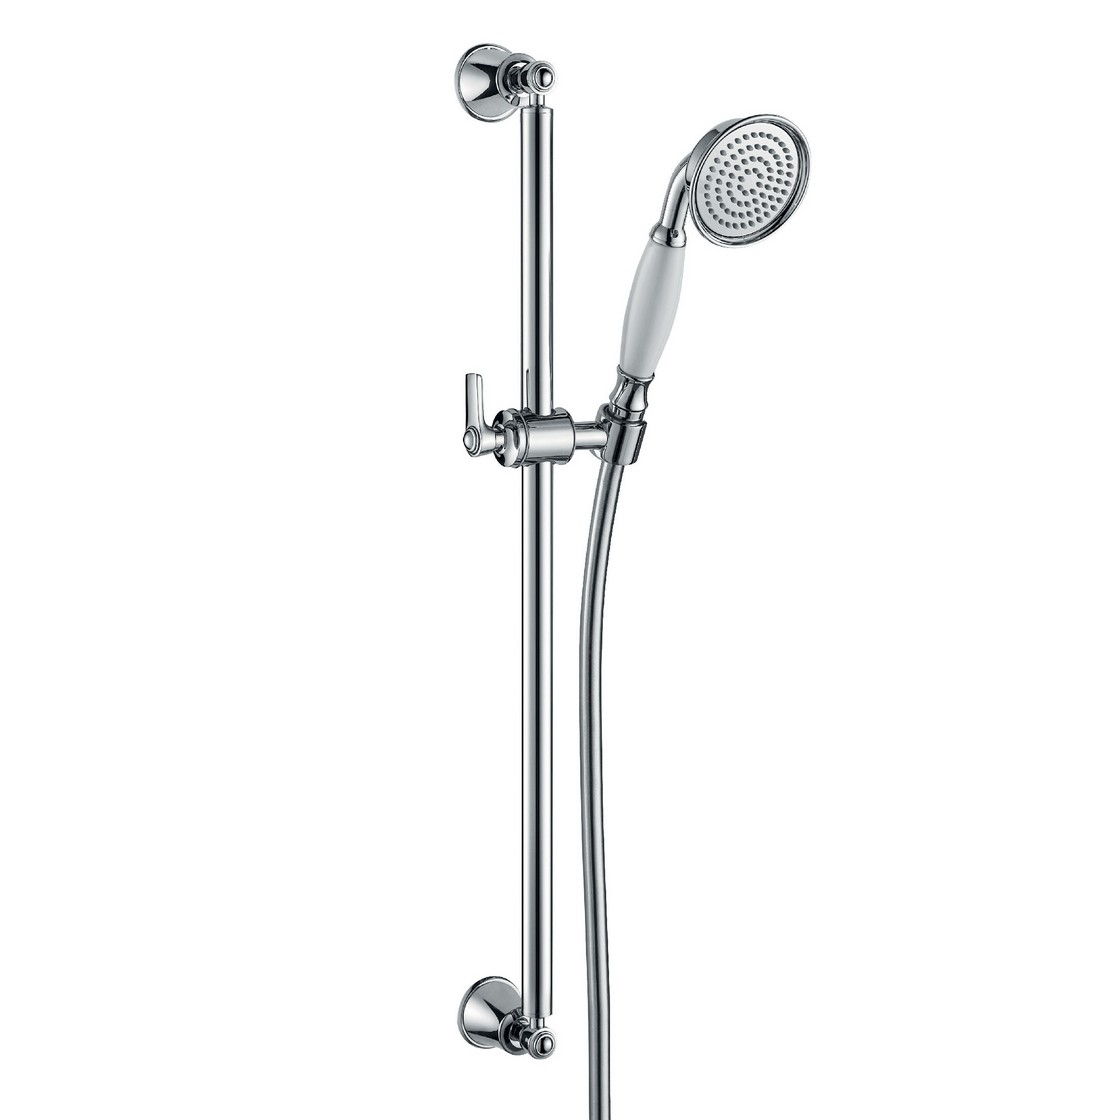 Shower bar with shower kit COLUMBIA 1019-260